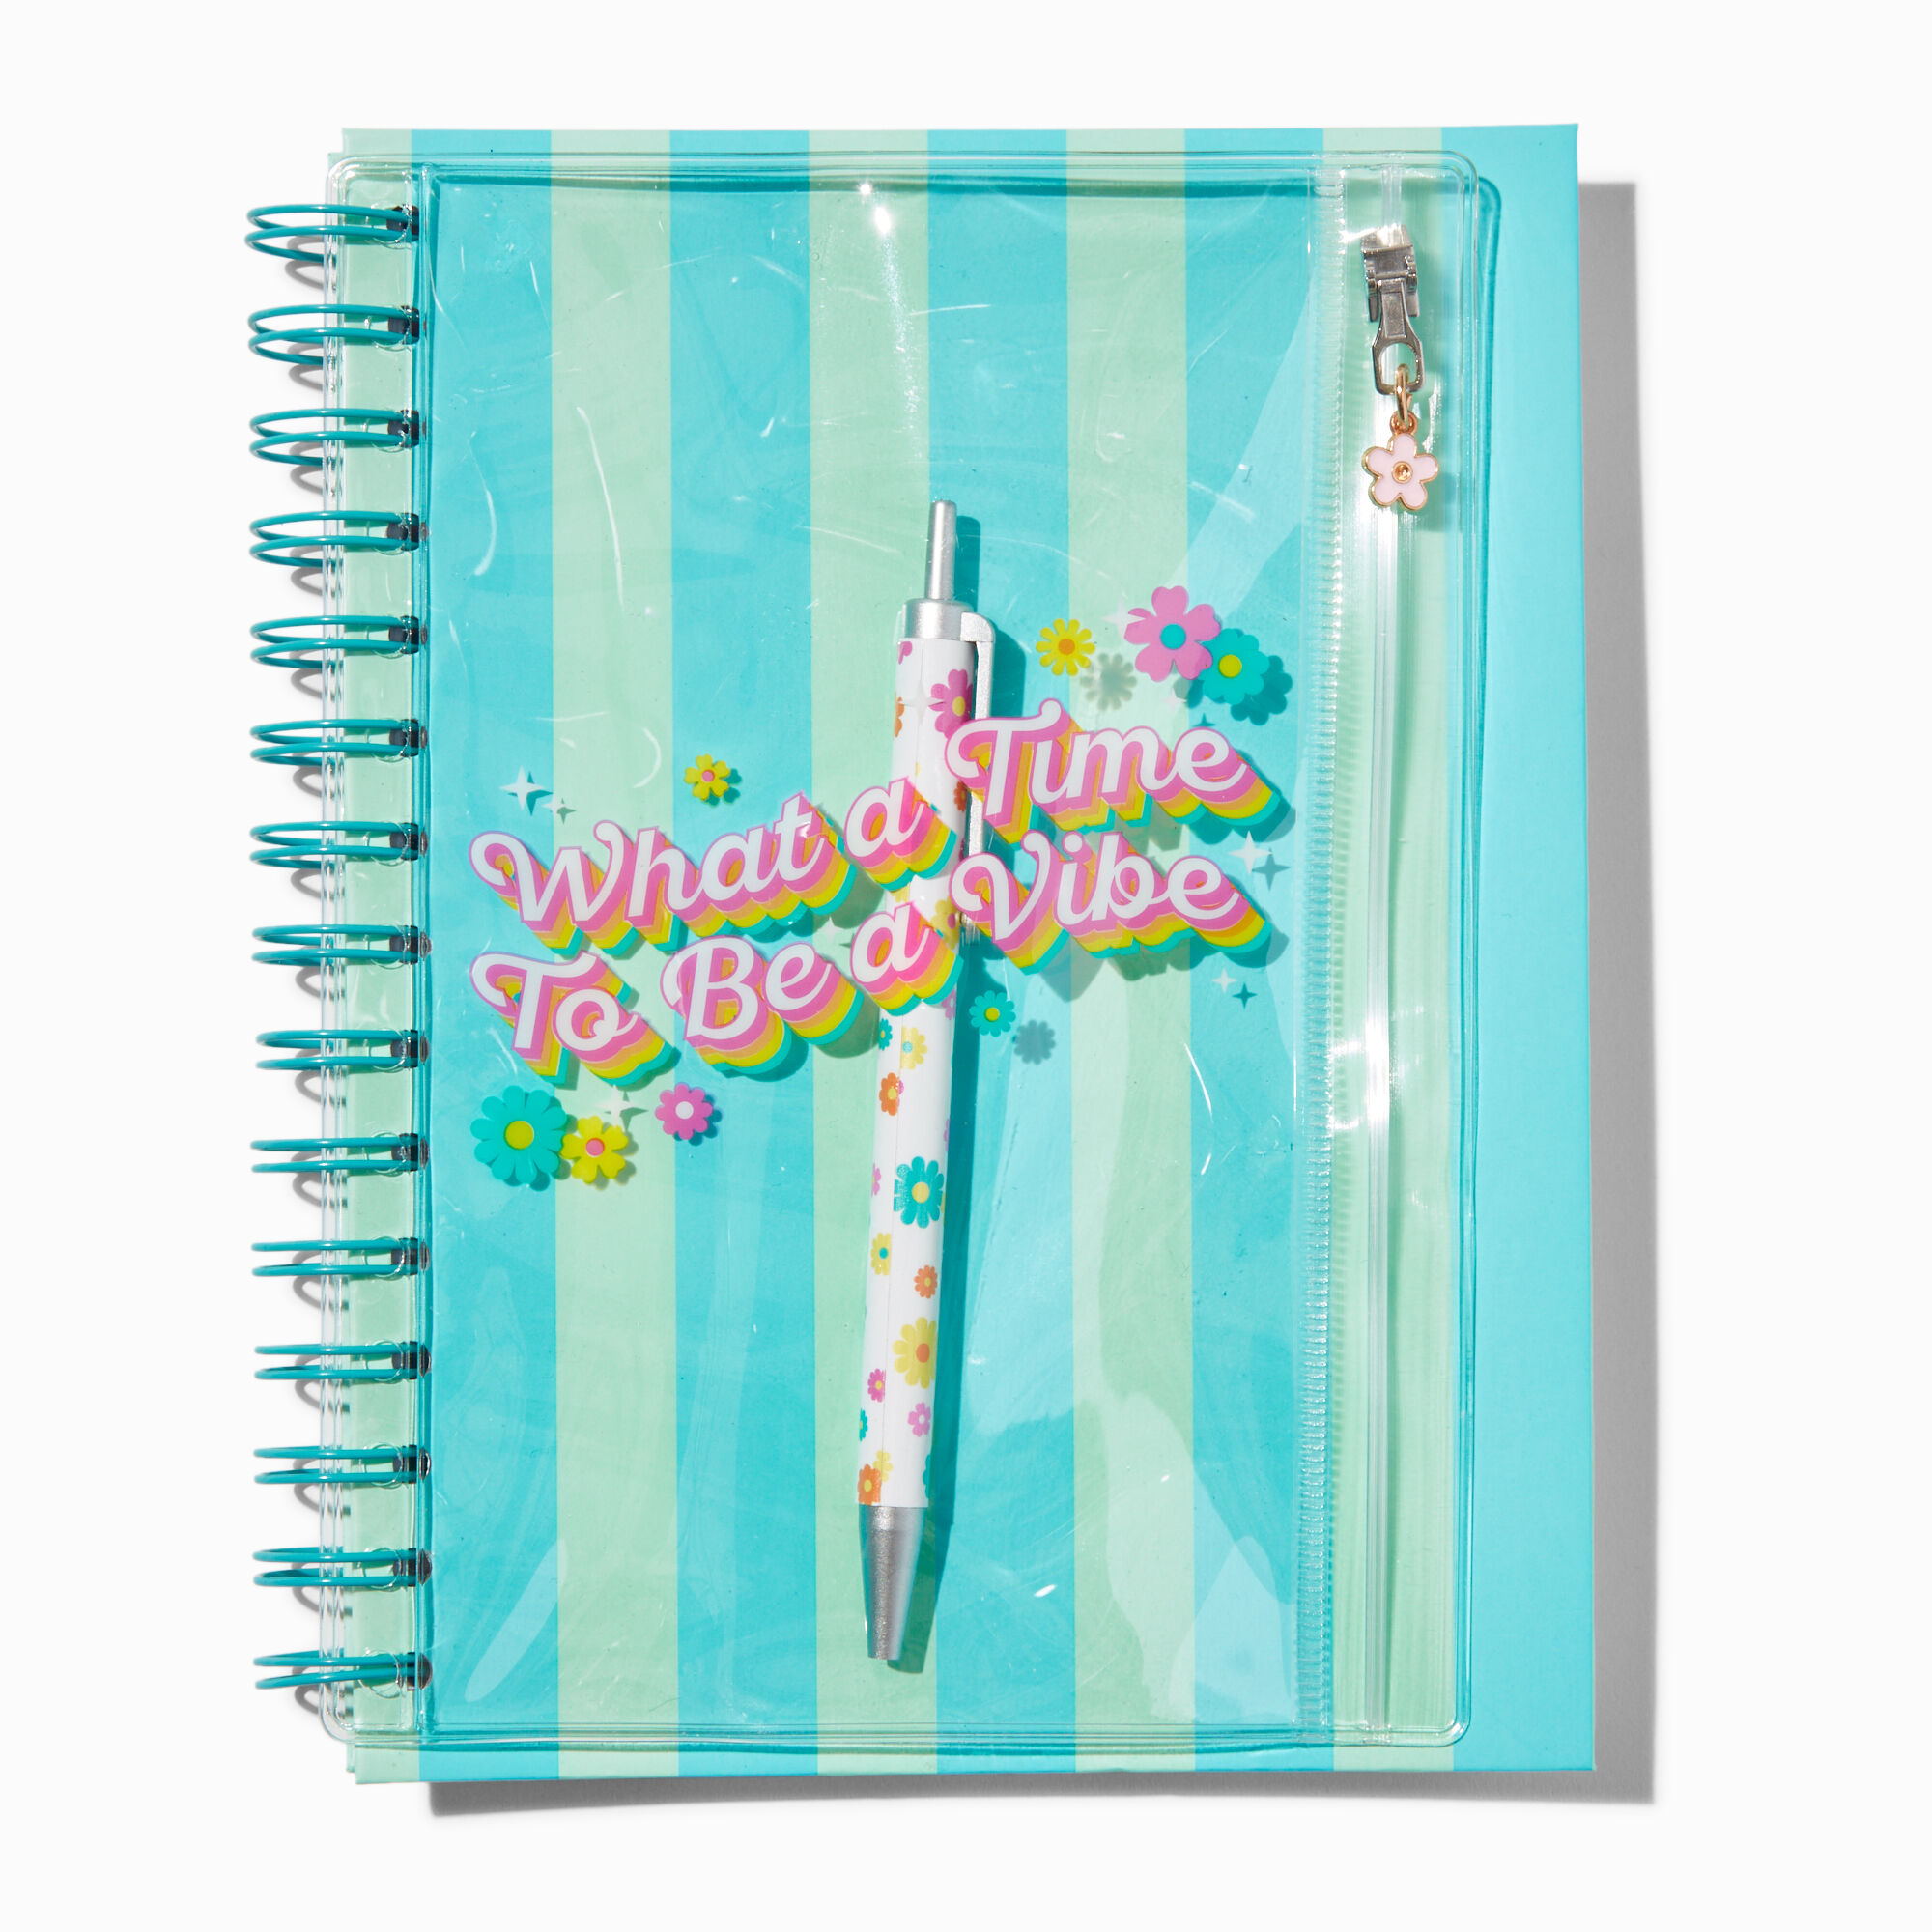 View Claires vibe Spiral Notebook With Pen Pouch information